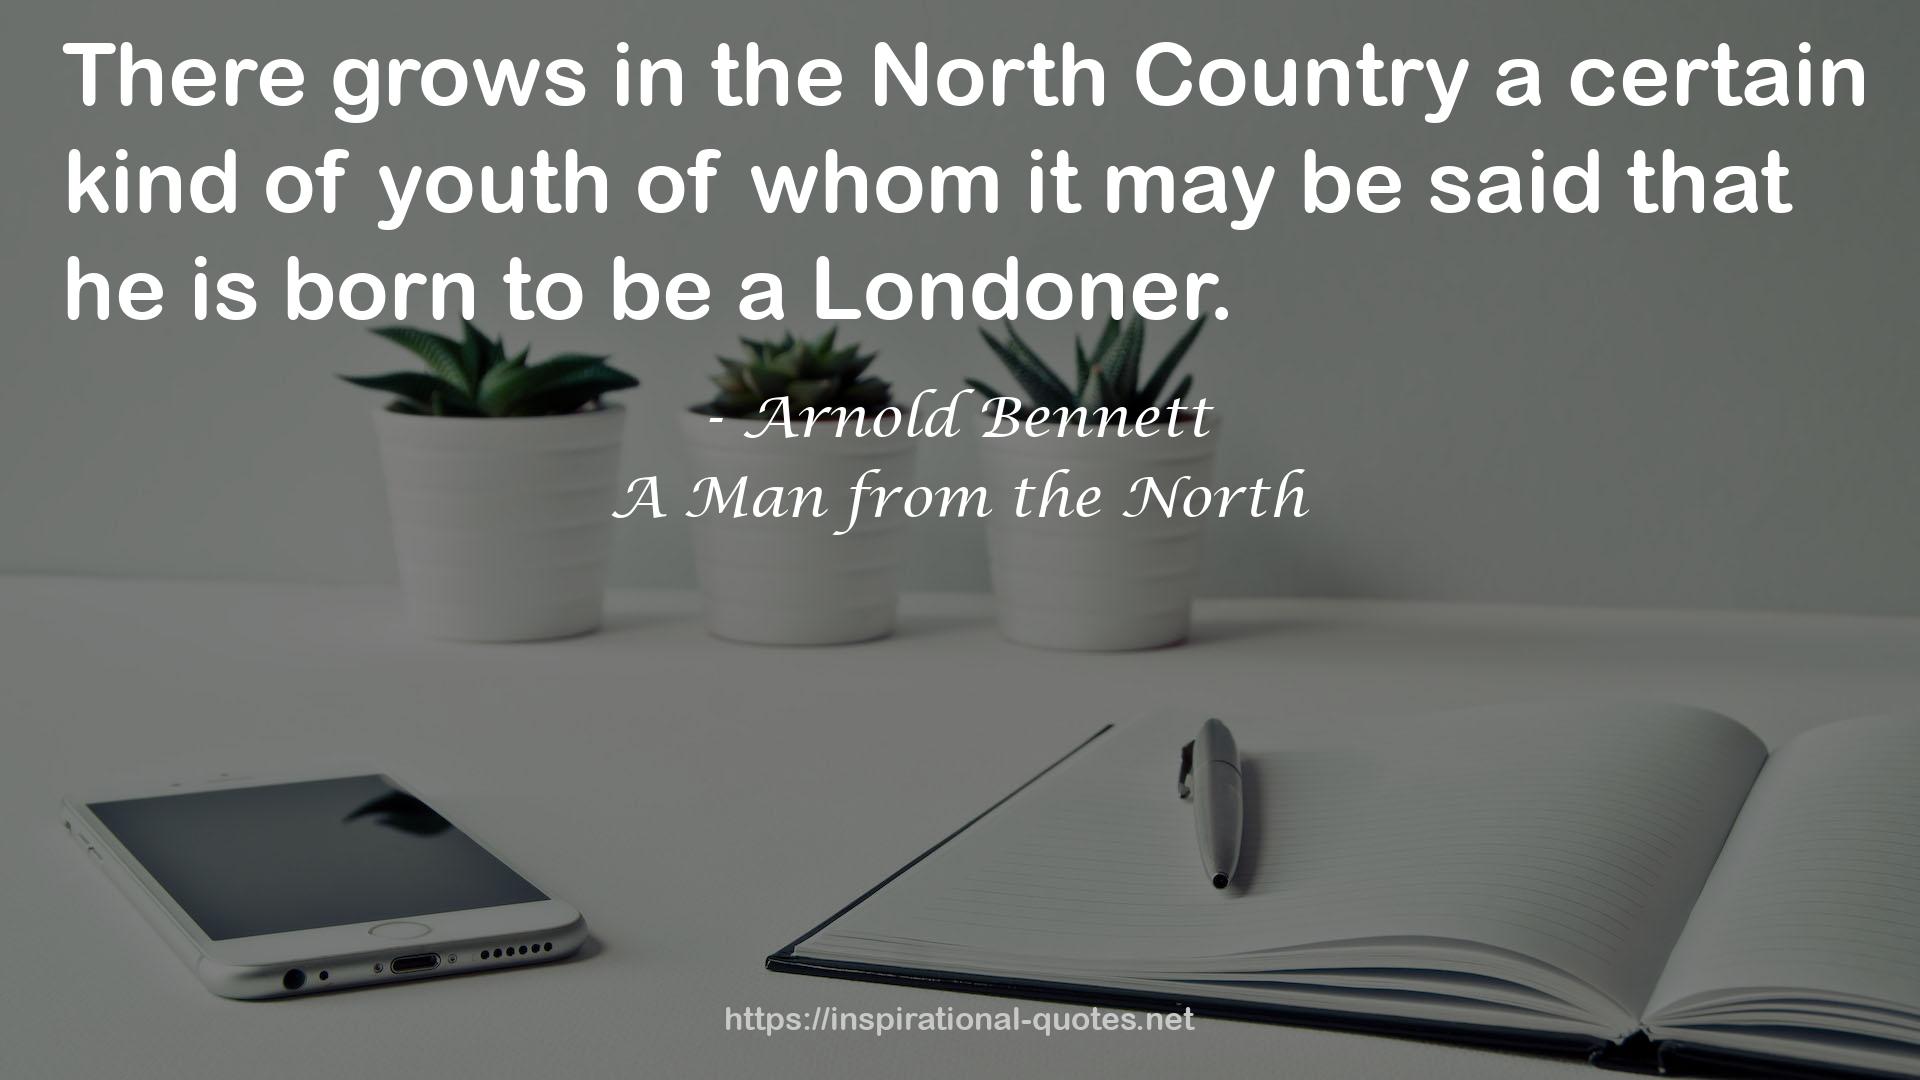 A Man from the North QUOTES